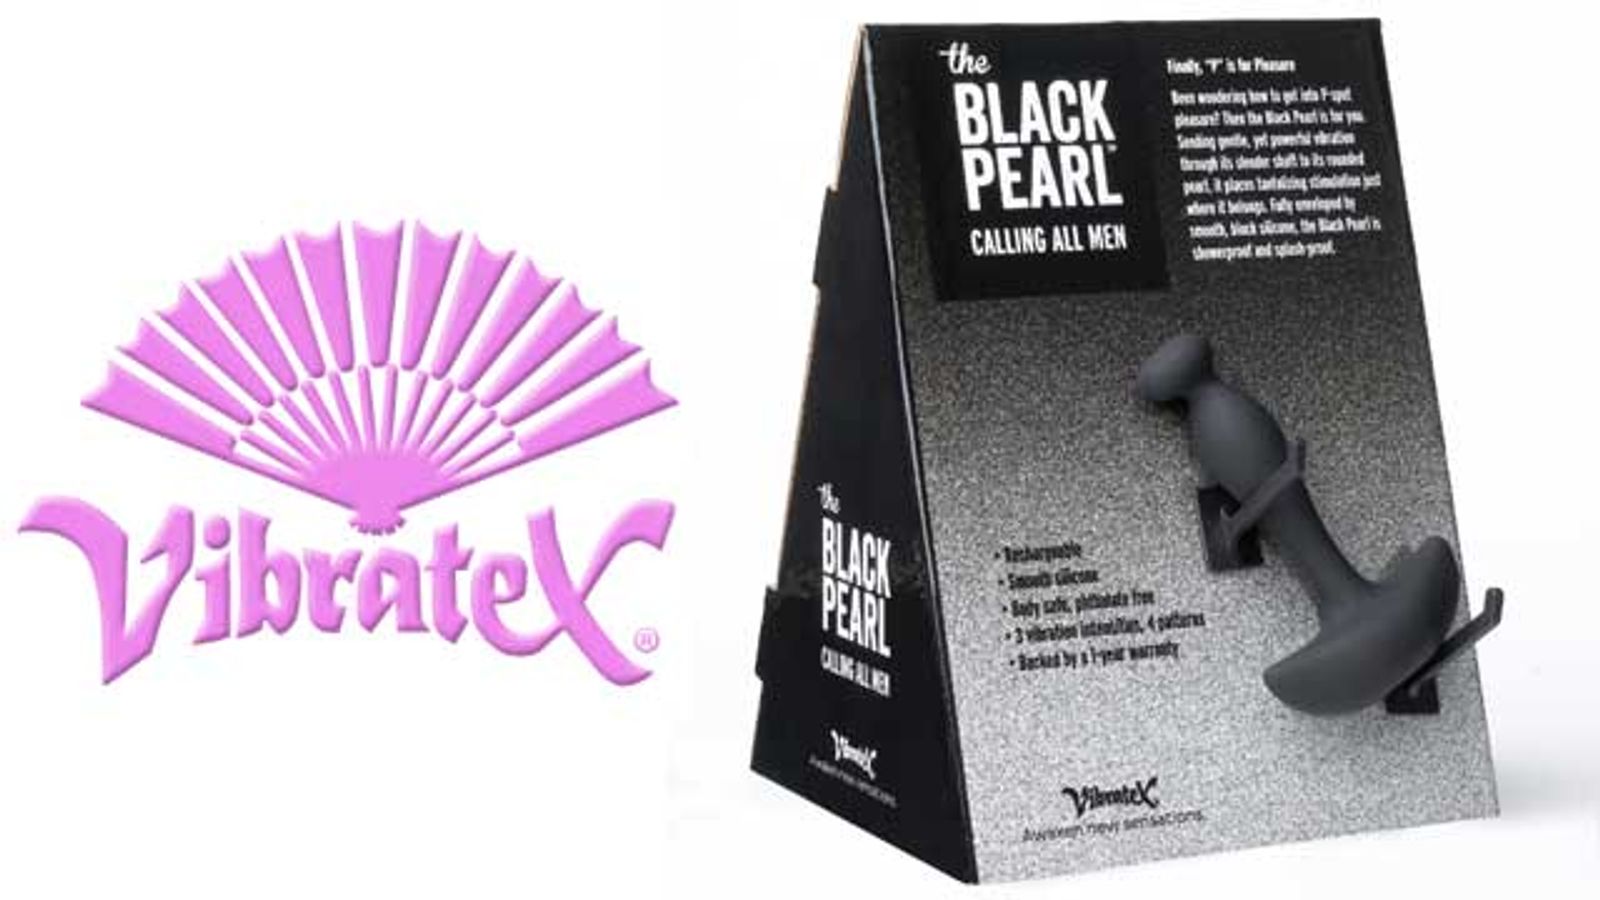 Vibratex Seeks Attention, Sales With New Stand for Black Pearl